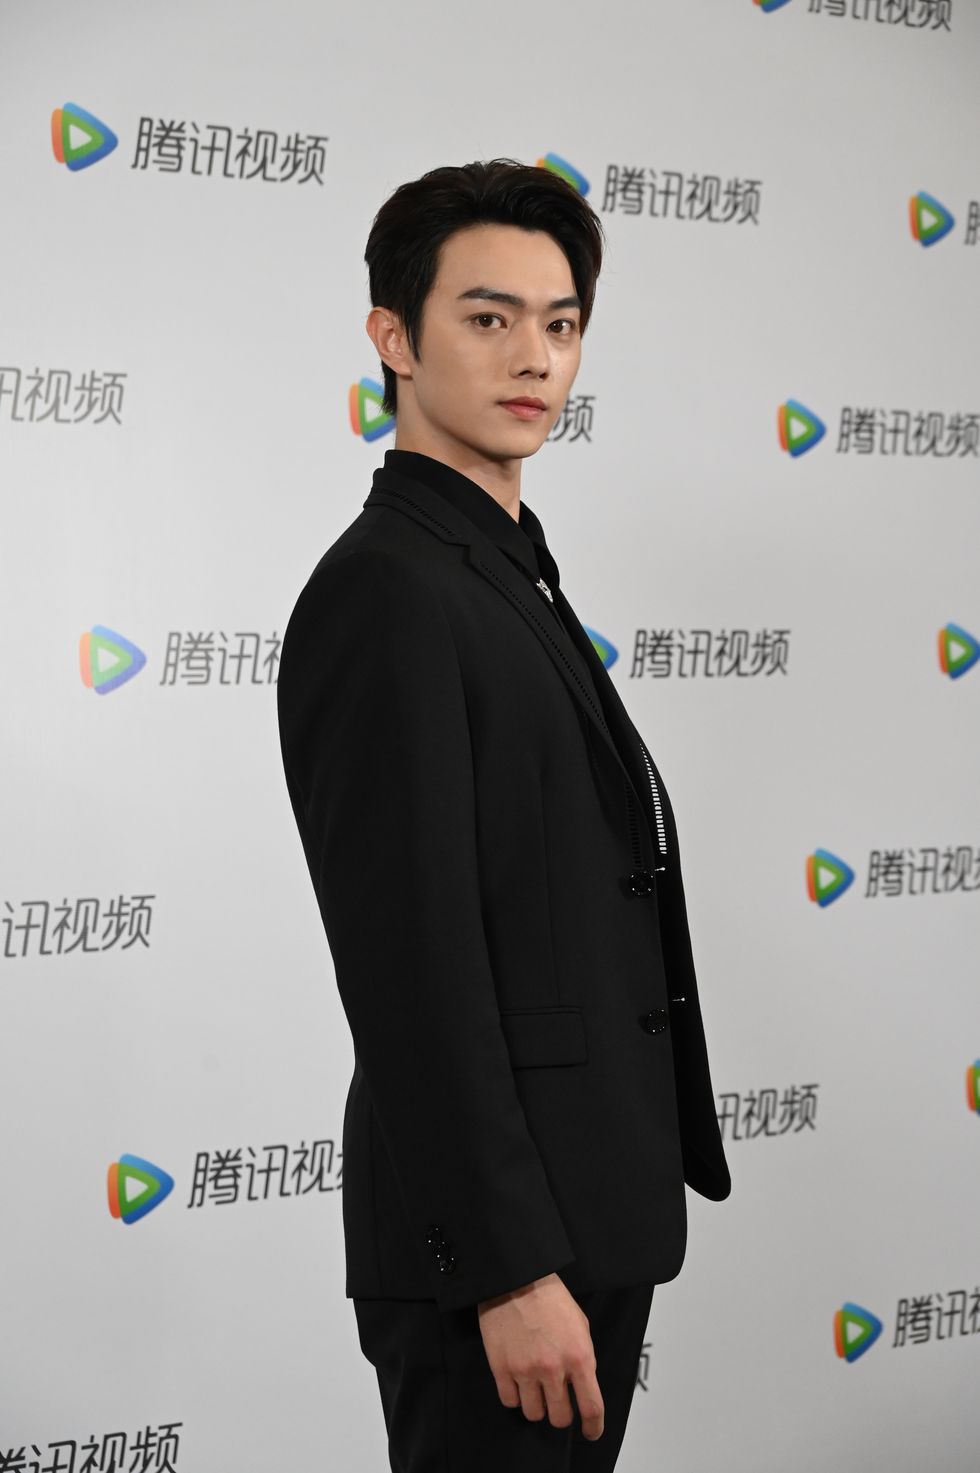 shanghai, china   june 07 actor xu kai poses at backstage during tencent video event on june 7, 2021 in shanghai, china photo by vcgvcg via getty images